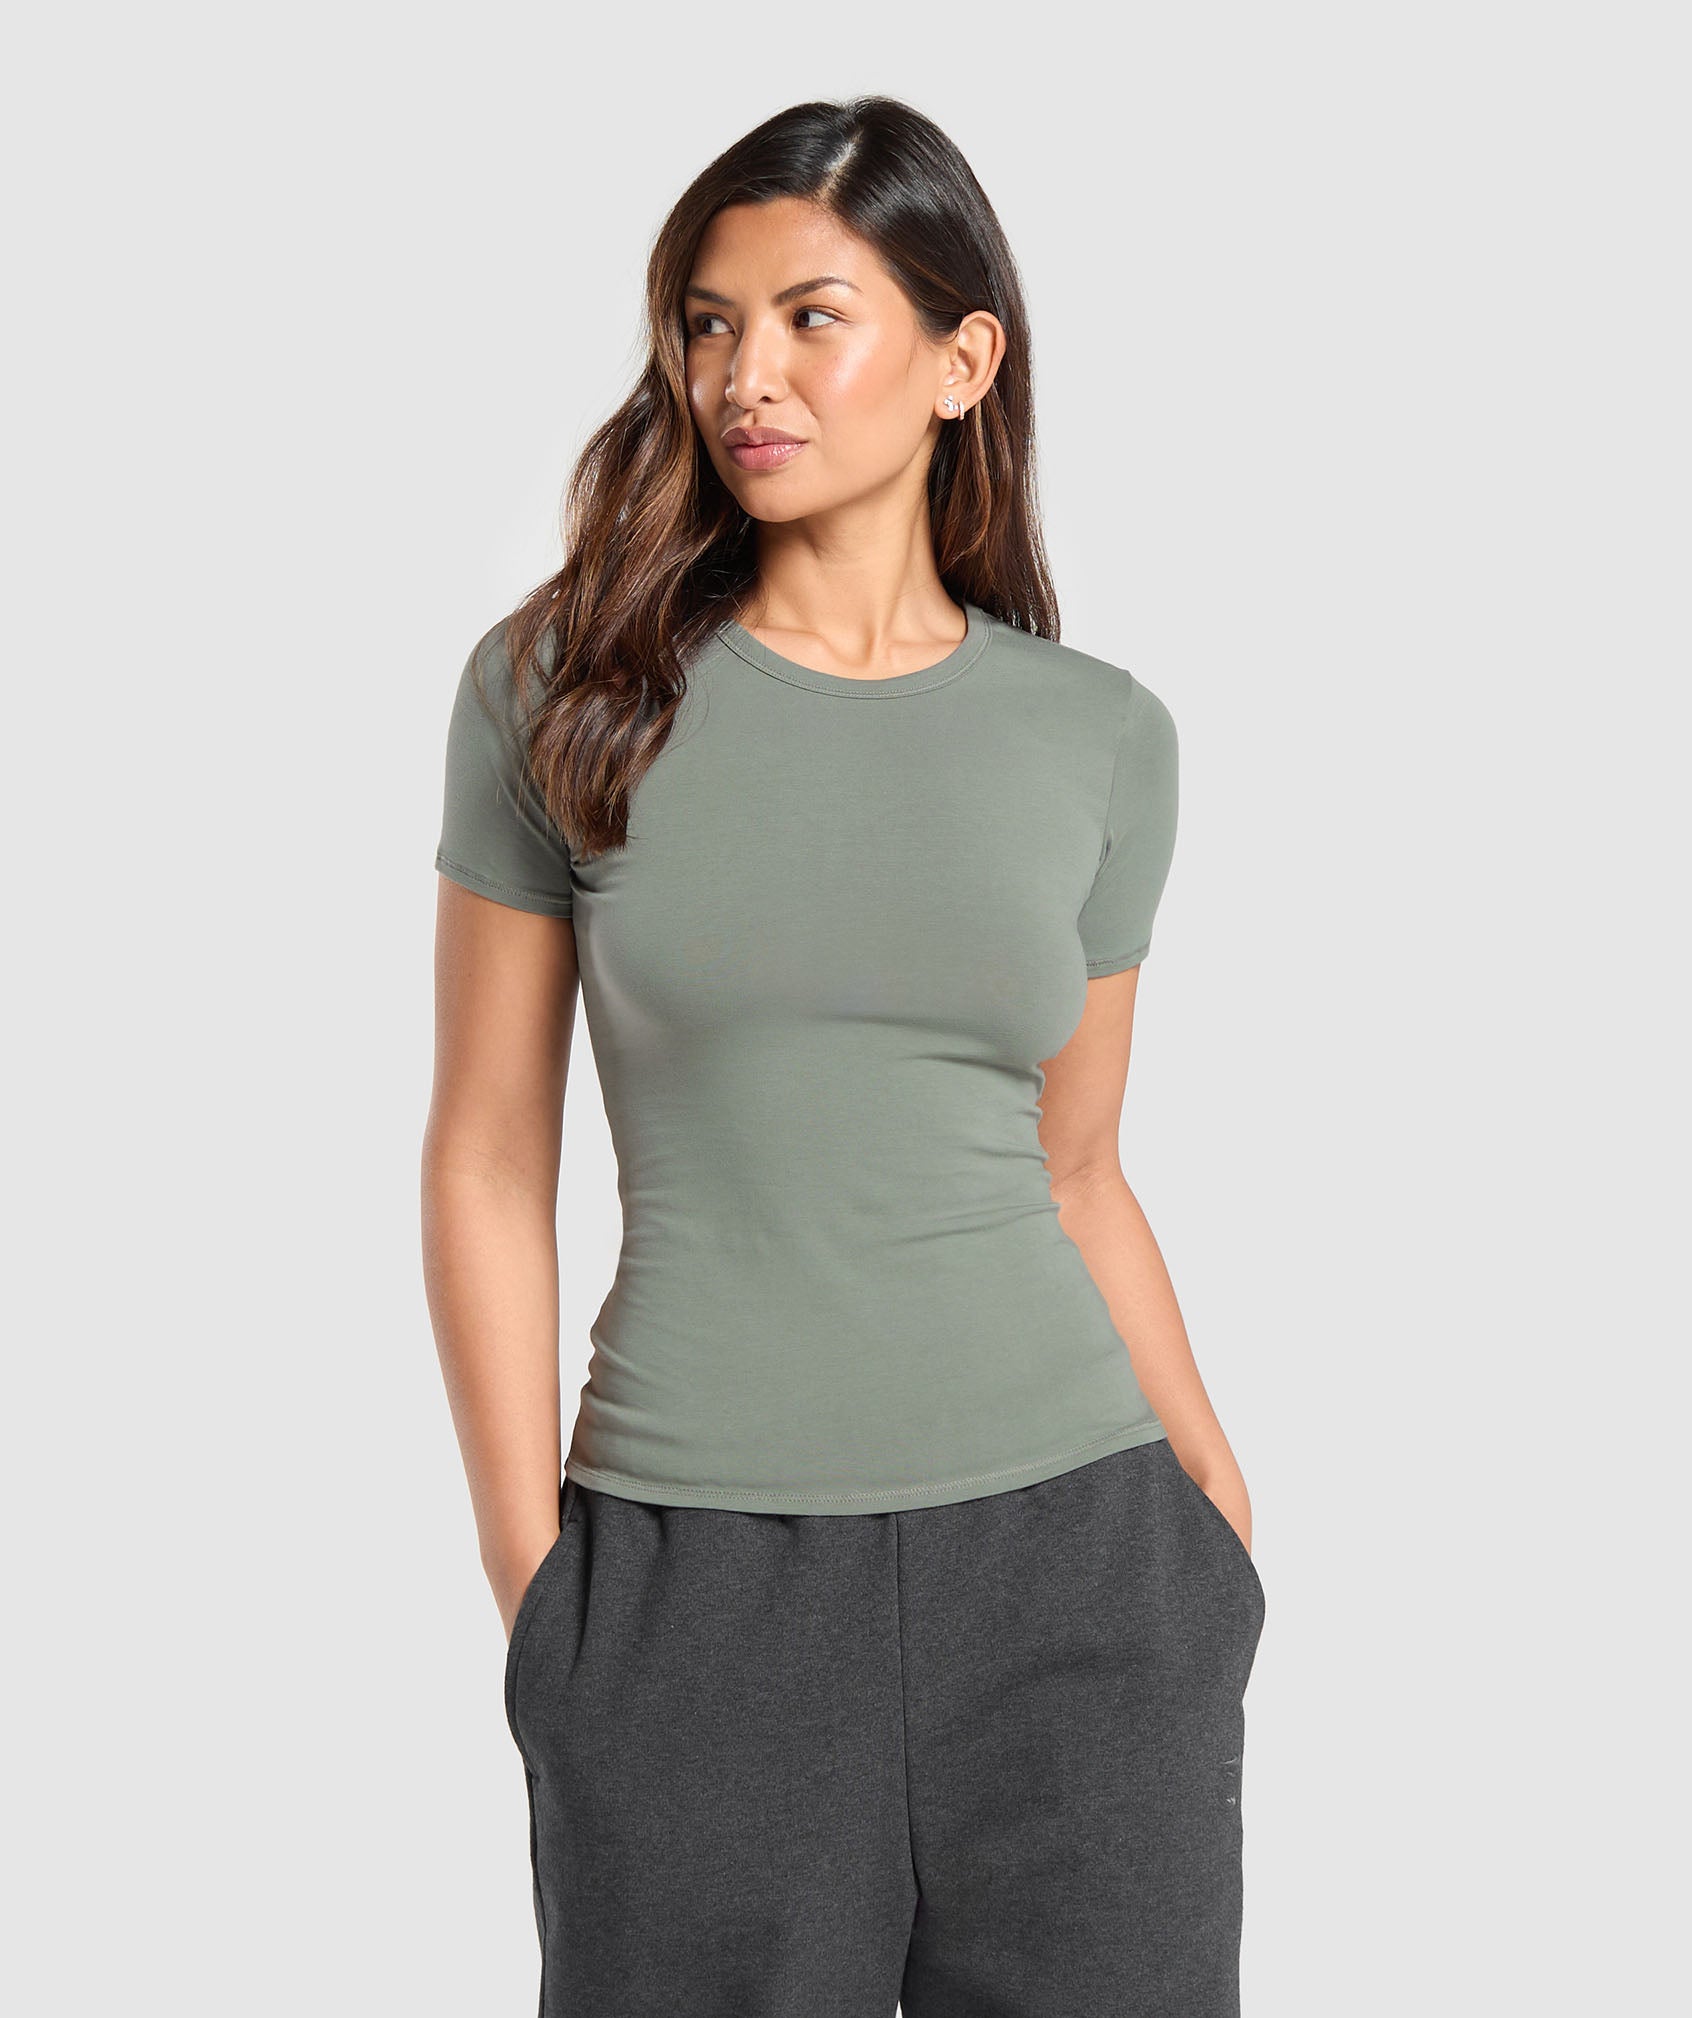 Cotton T-Shirt in Unit Green